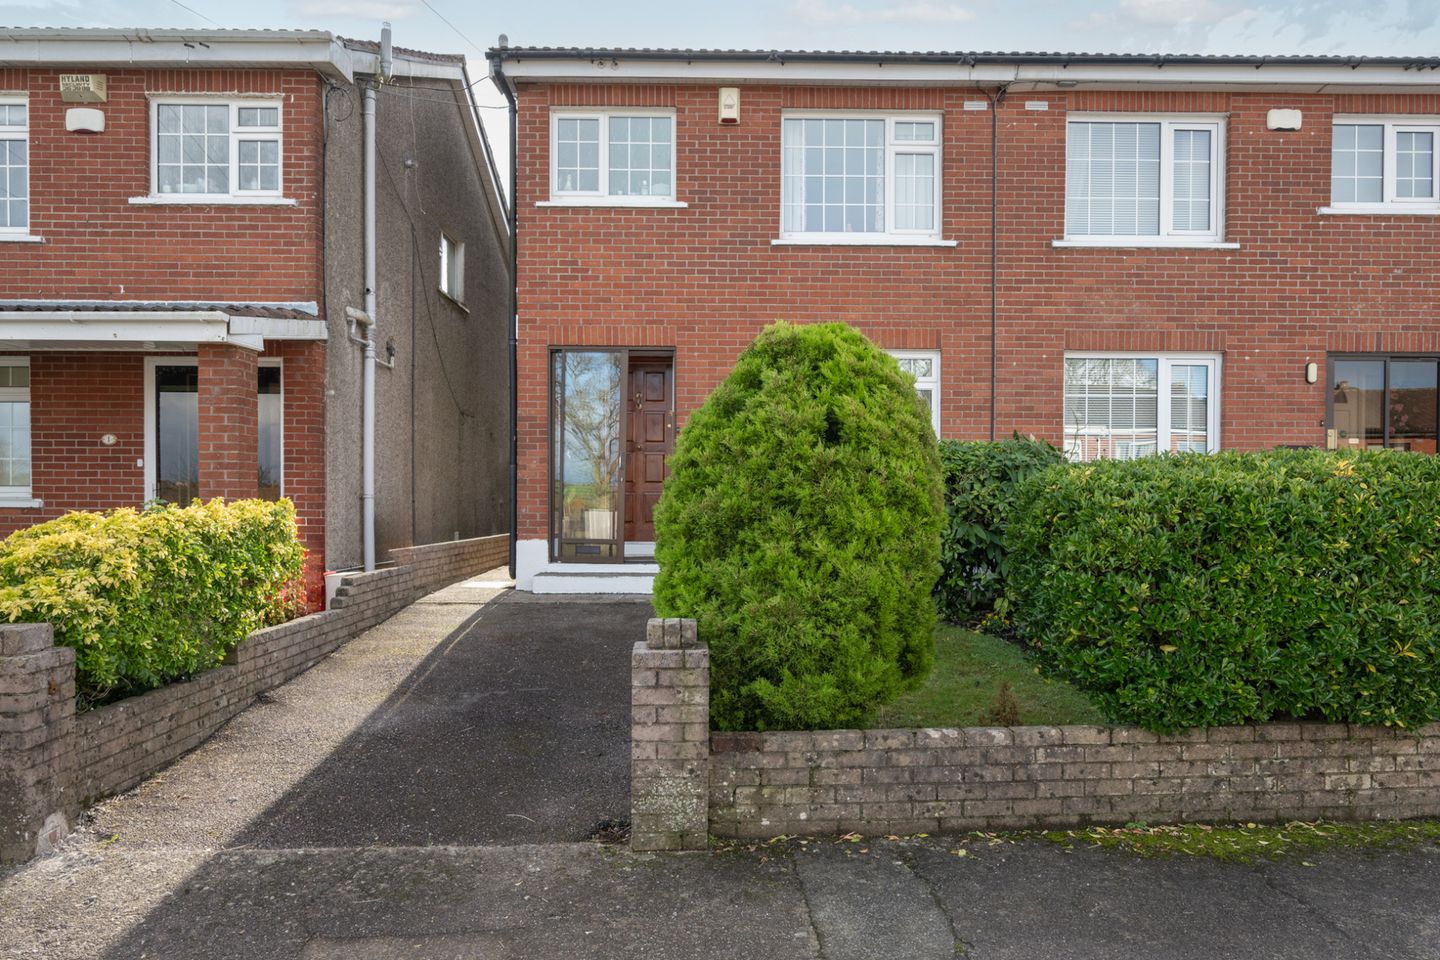 3 Murmont Court, Old Youghal Road, Cork, Mayfield, Co. Cork, T23X2N7